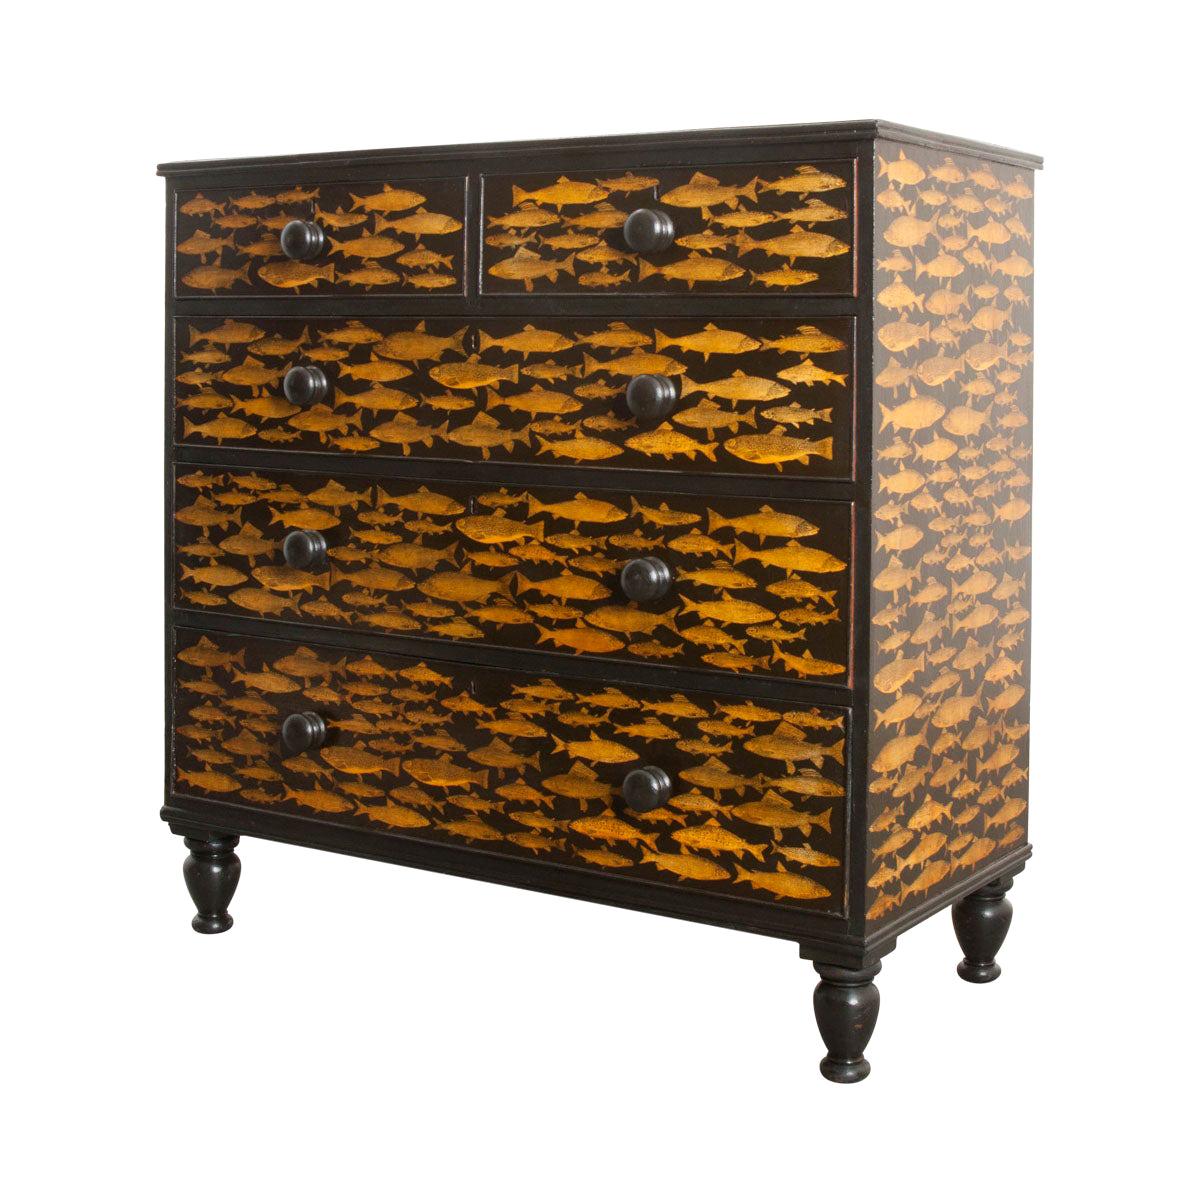 English 19th Century Découpaged Pine Chest-of-Drawers